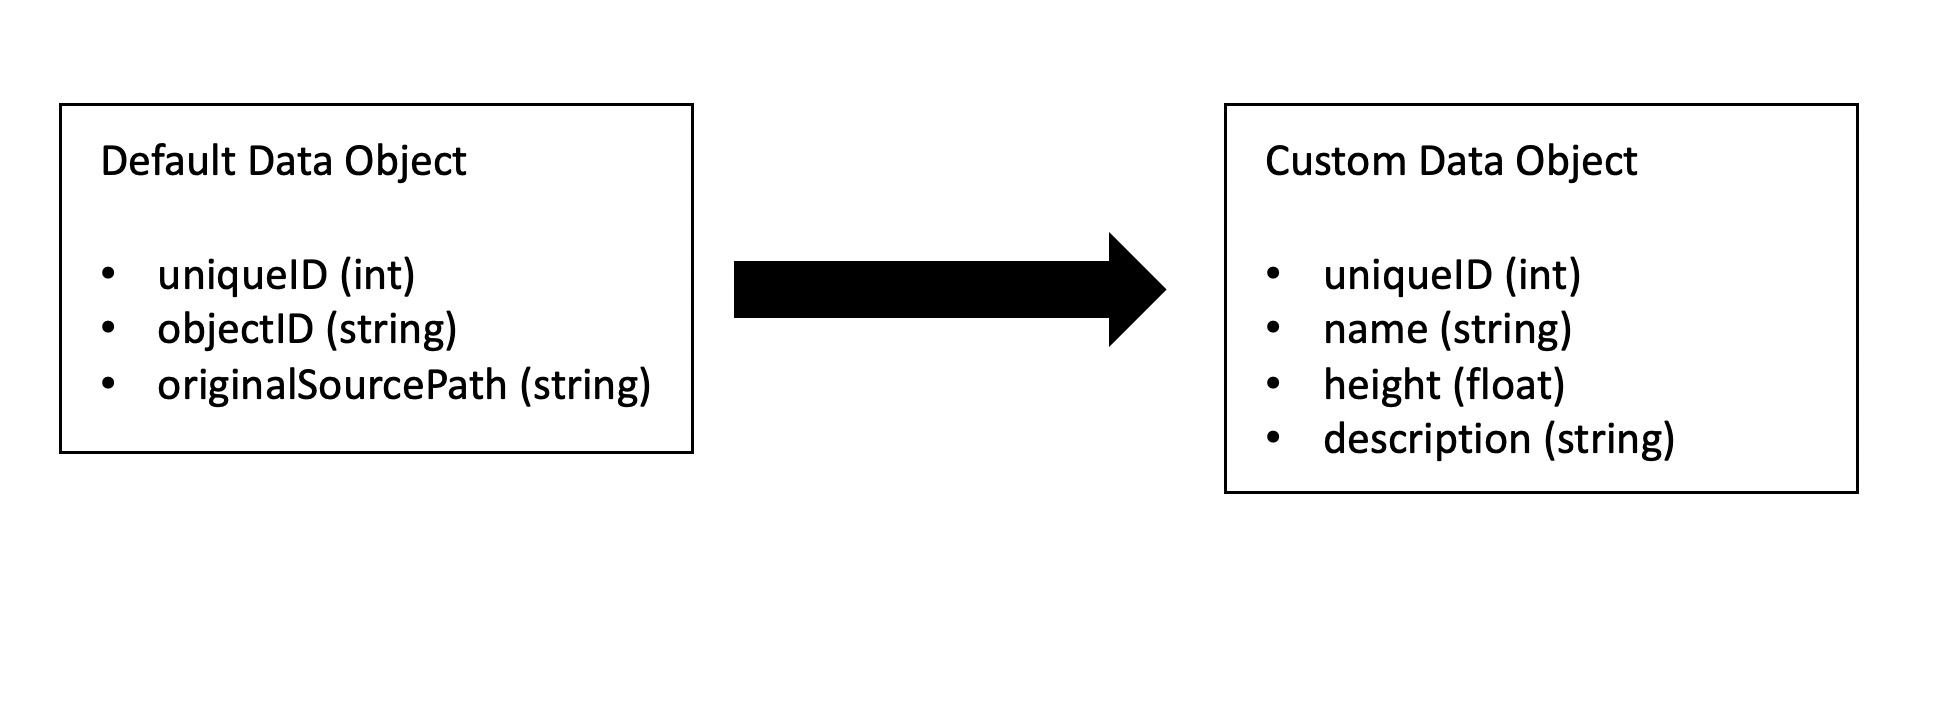 A diagram showing an example transformation from default data object to custom data object